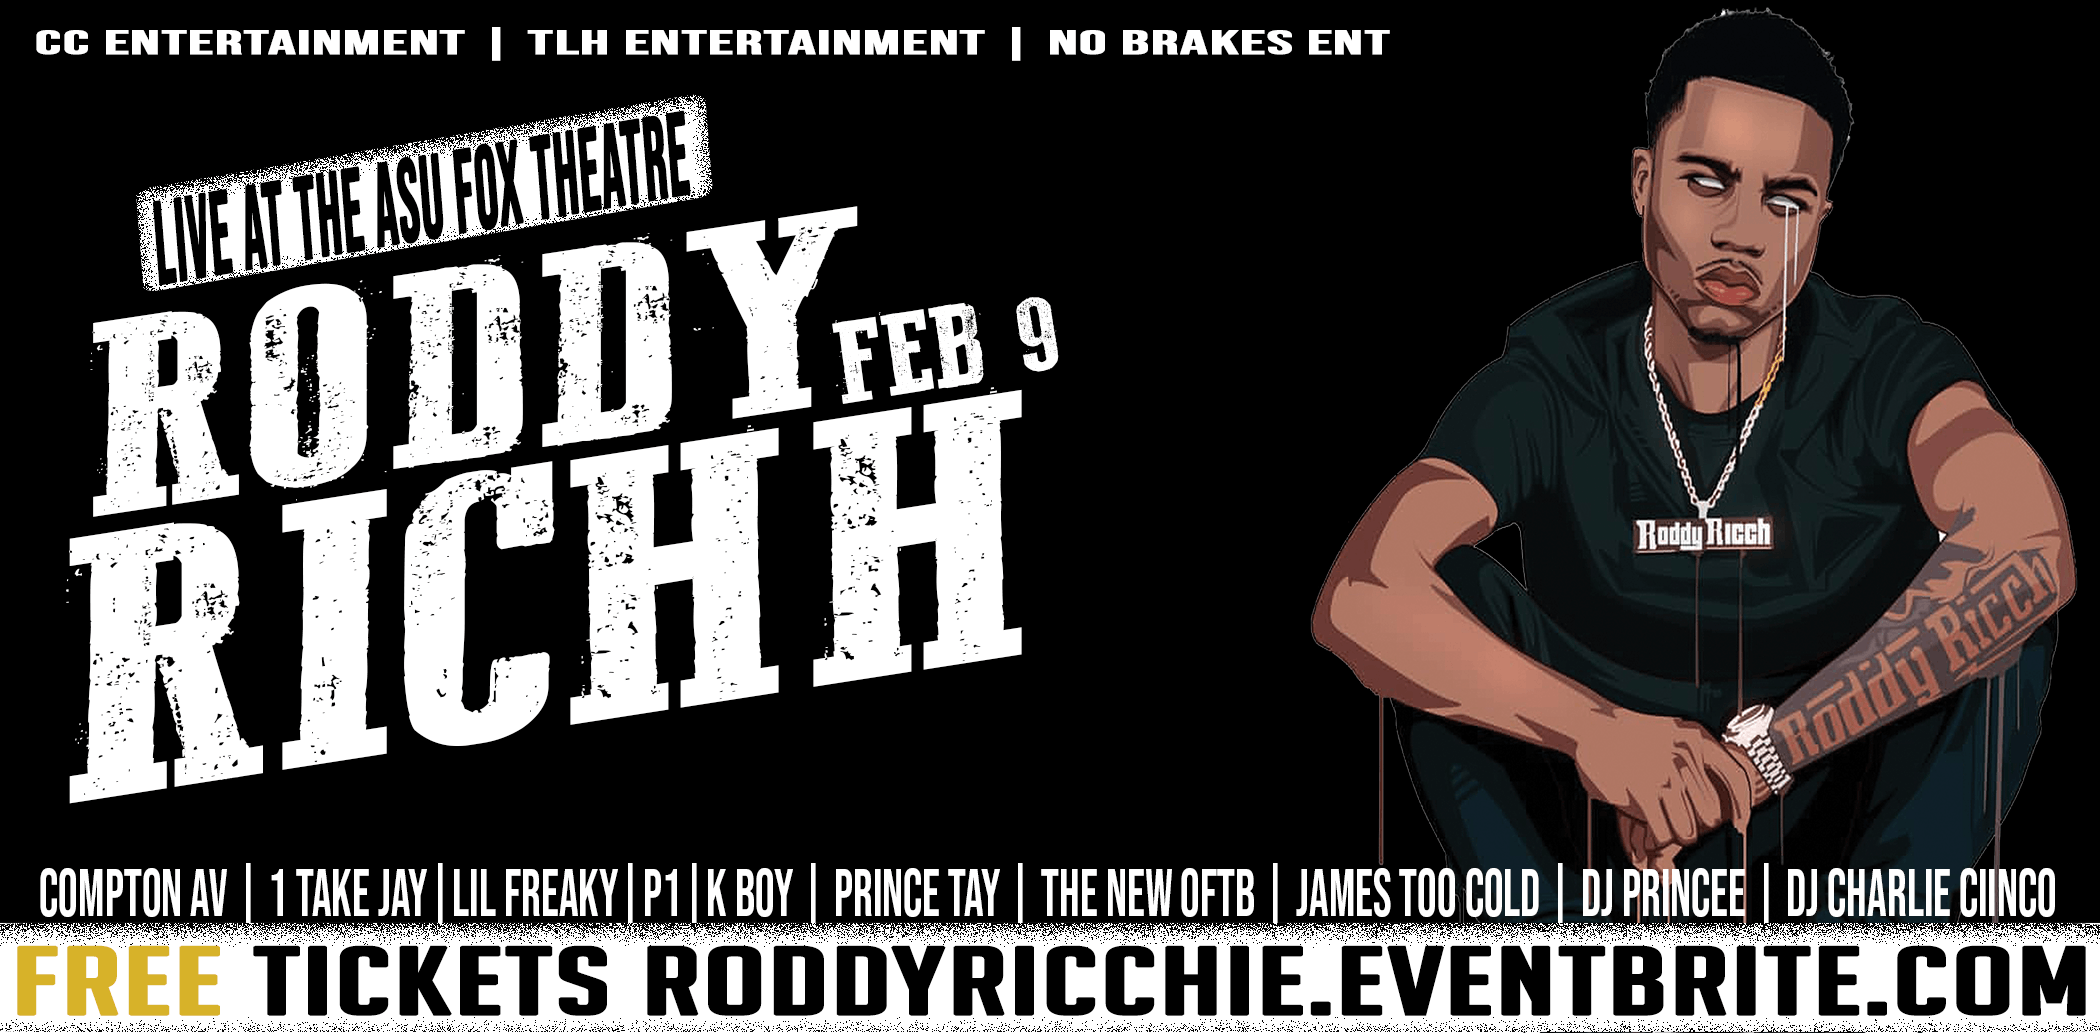 Free Tickets For Roddy Ricch Live In The Ie Feed The Streets